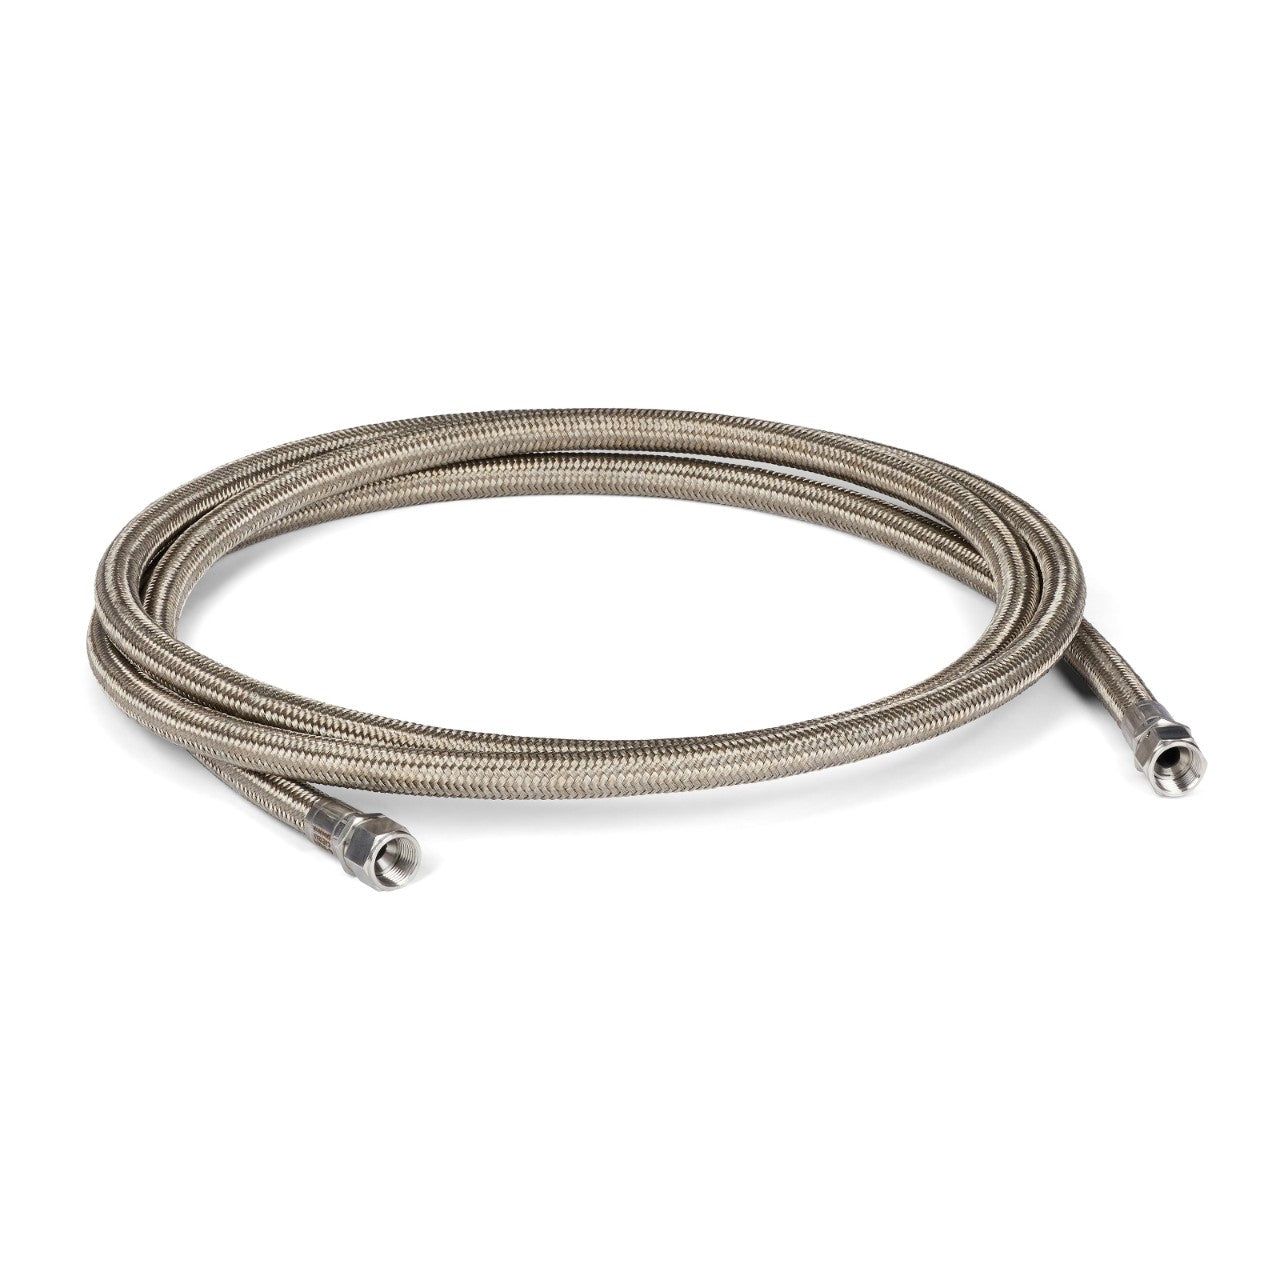 15 ft. (4.6 M) Stainless Steel Braided PTFE Ambient Hose,  No. 16 (0.867 in. / 22.0 mm ID)